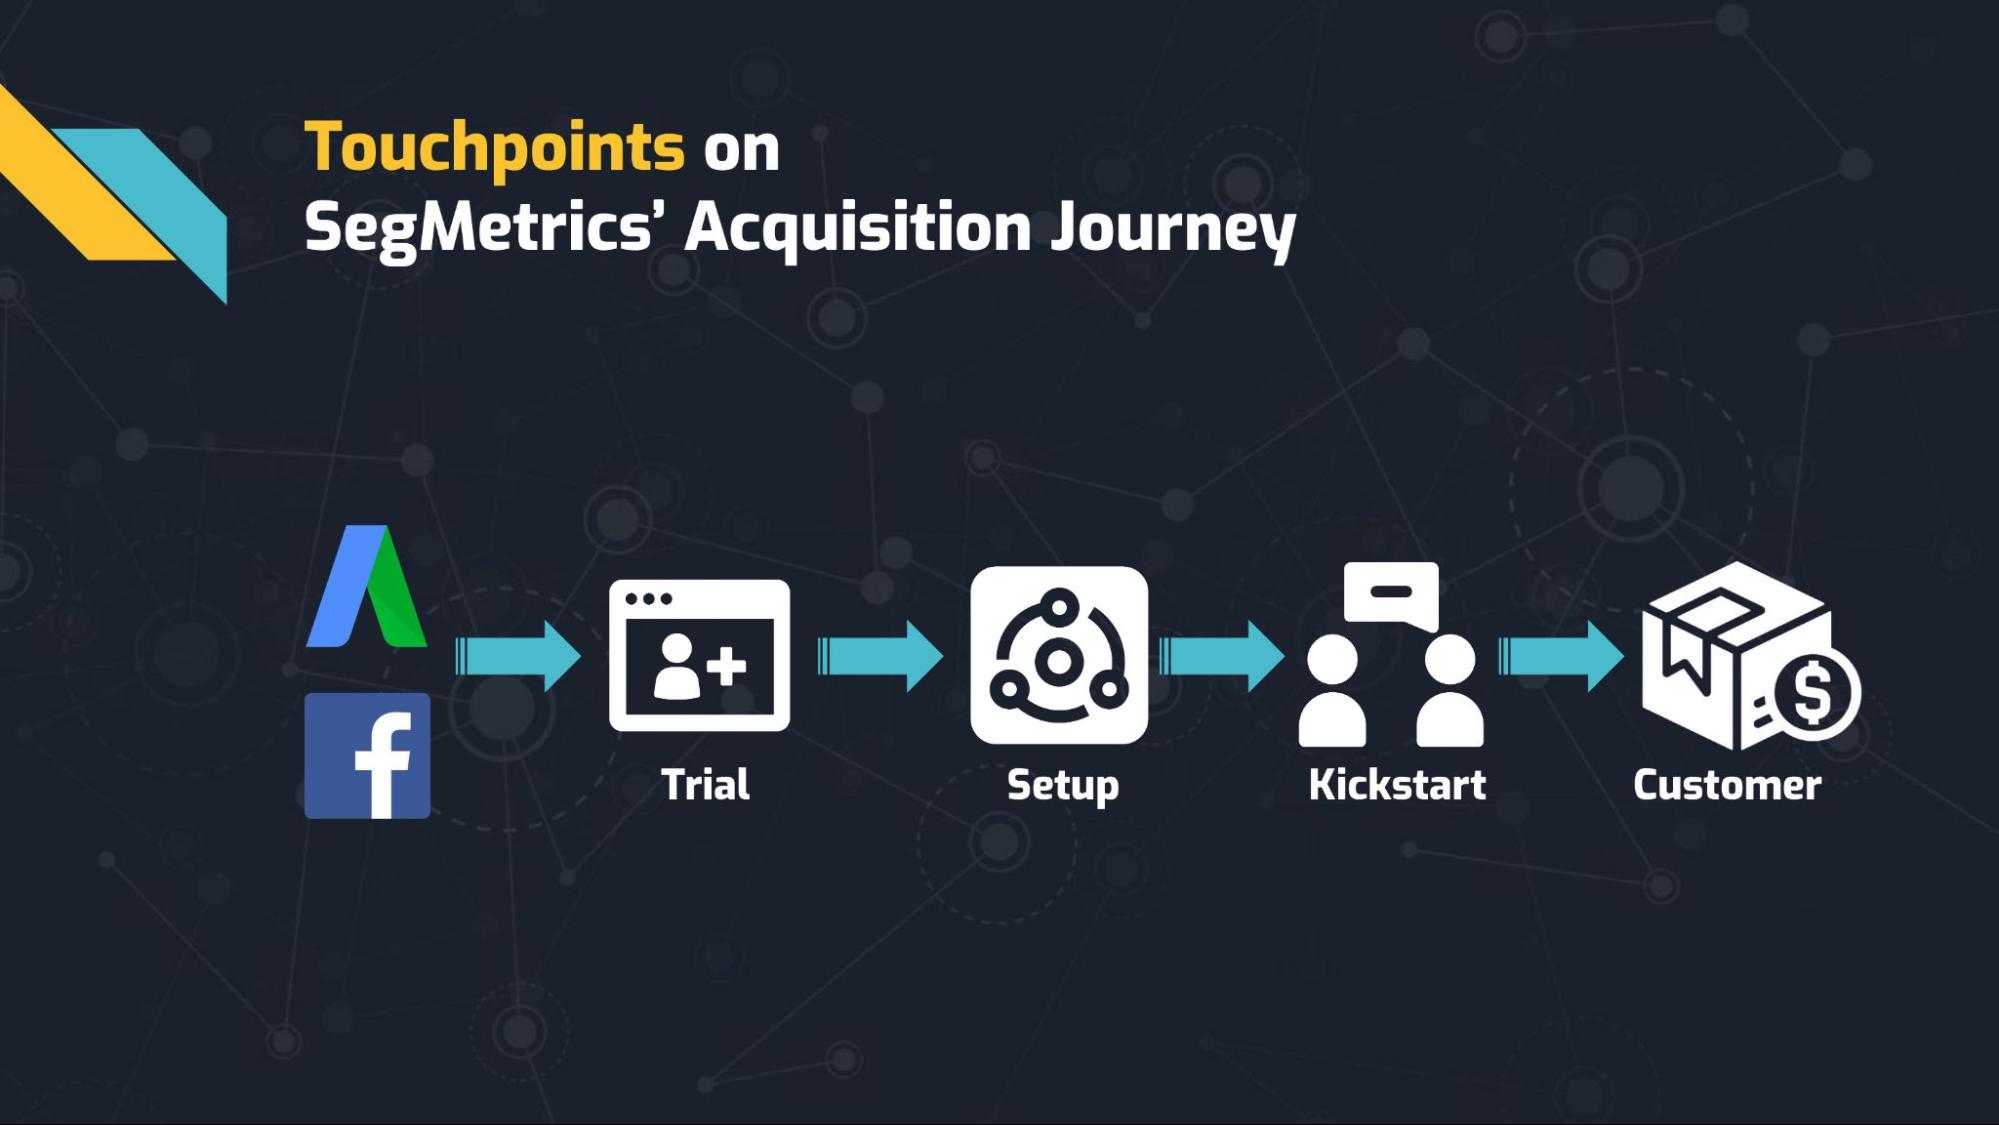 Using Segments to Optimize Customer Value: Slide showing SegMetrics' touchpoints in the customer journey